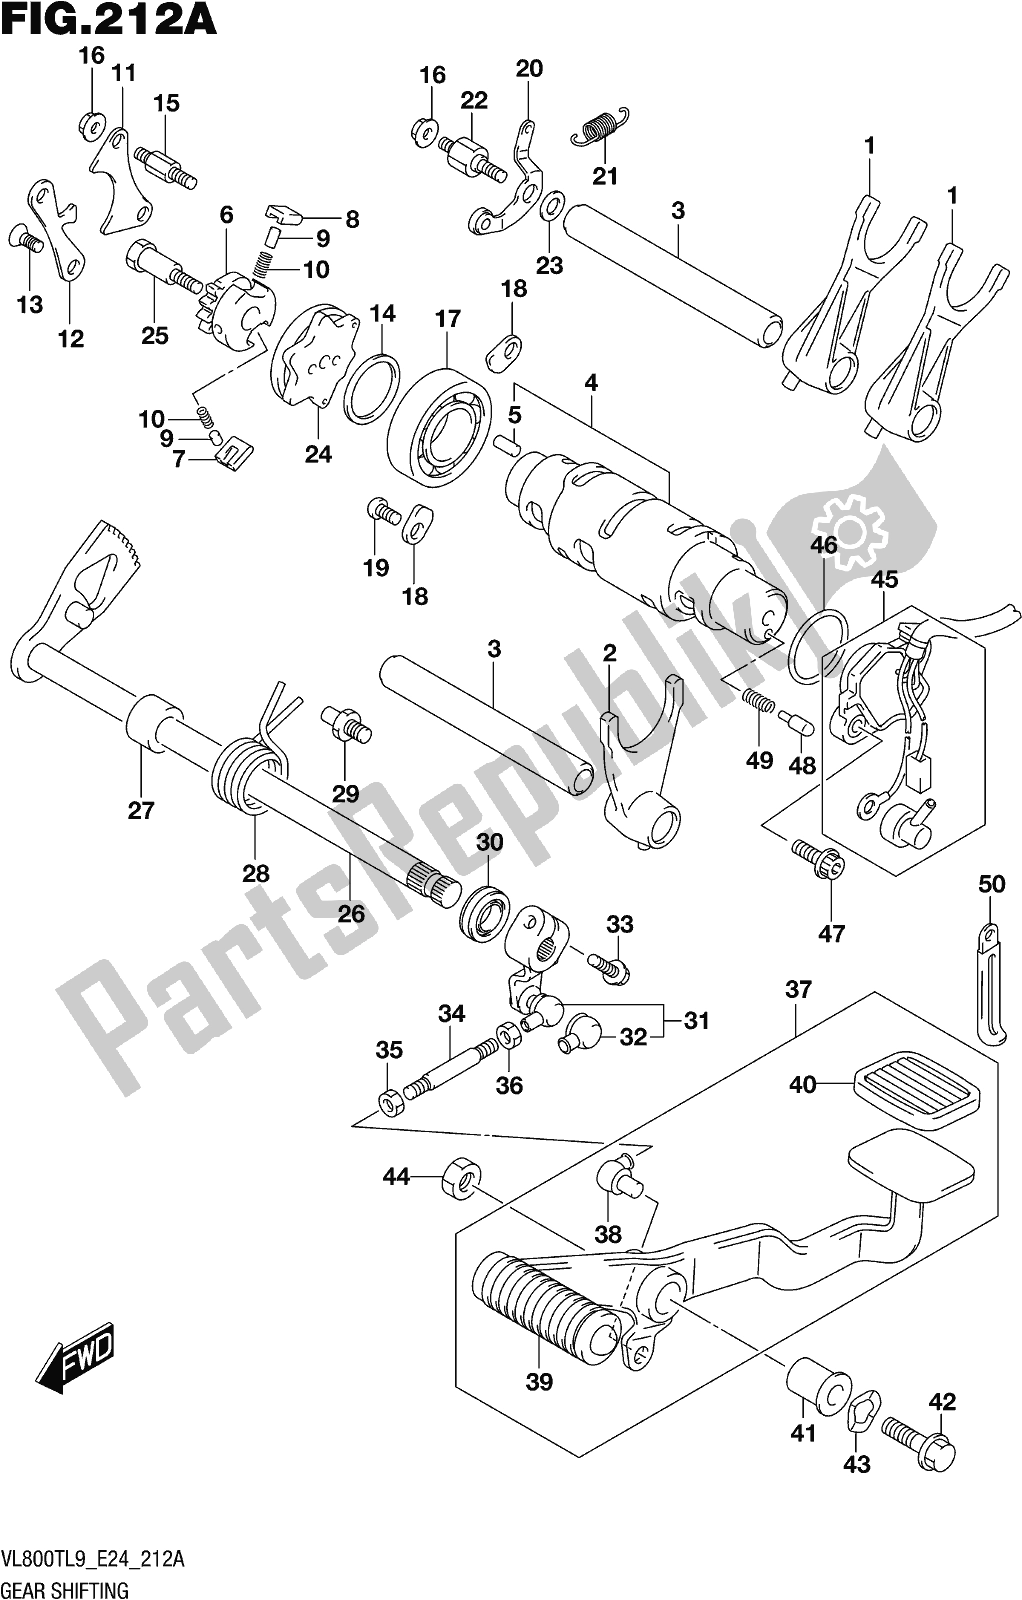 All parts for the Fig. 212a Gear Shifting of the Suzuki VL 800T 2019